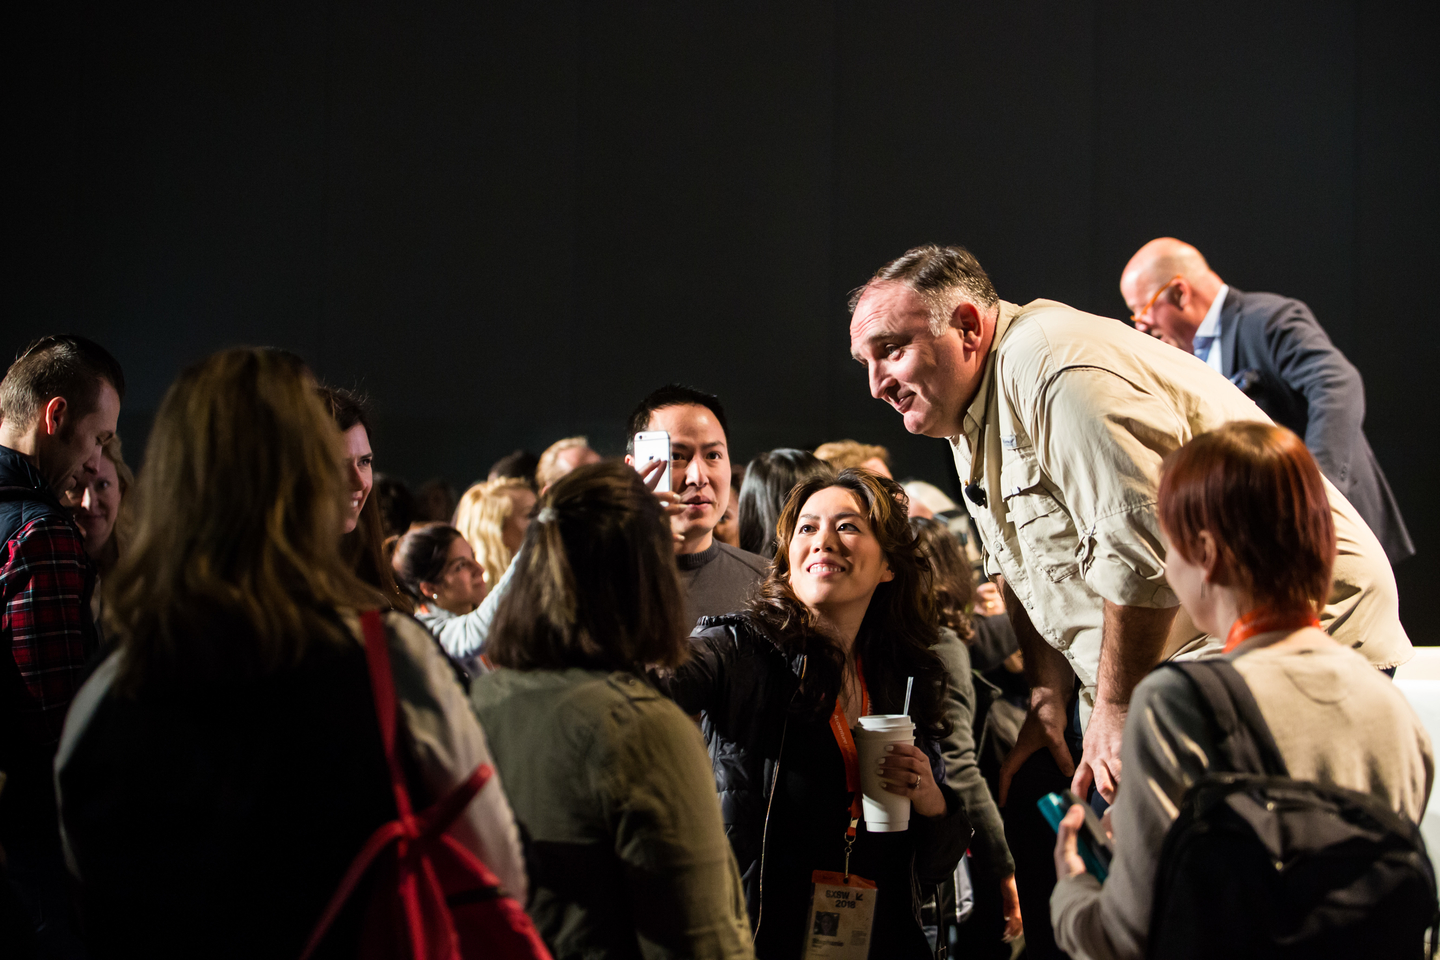 Chef José Andres hosted “Changing the World Through Food.” Photo by Errich Petersen